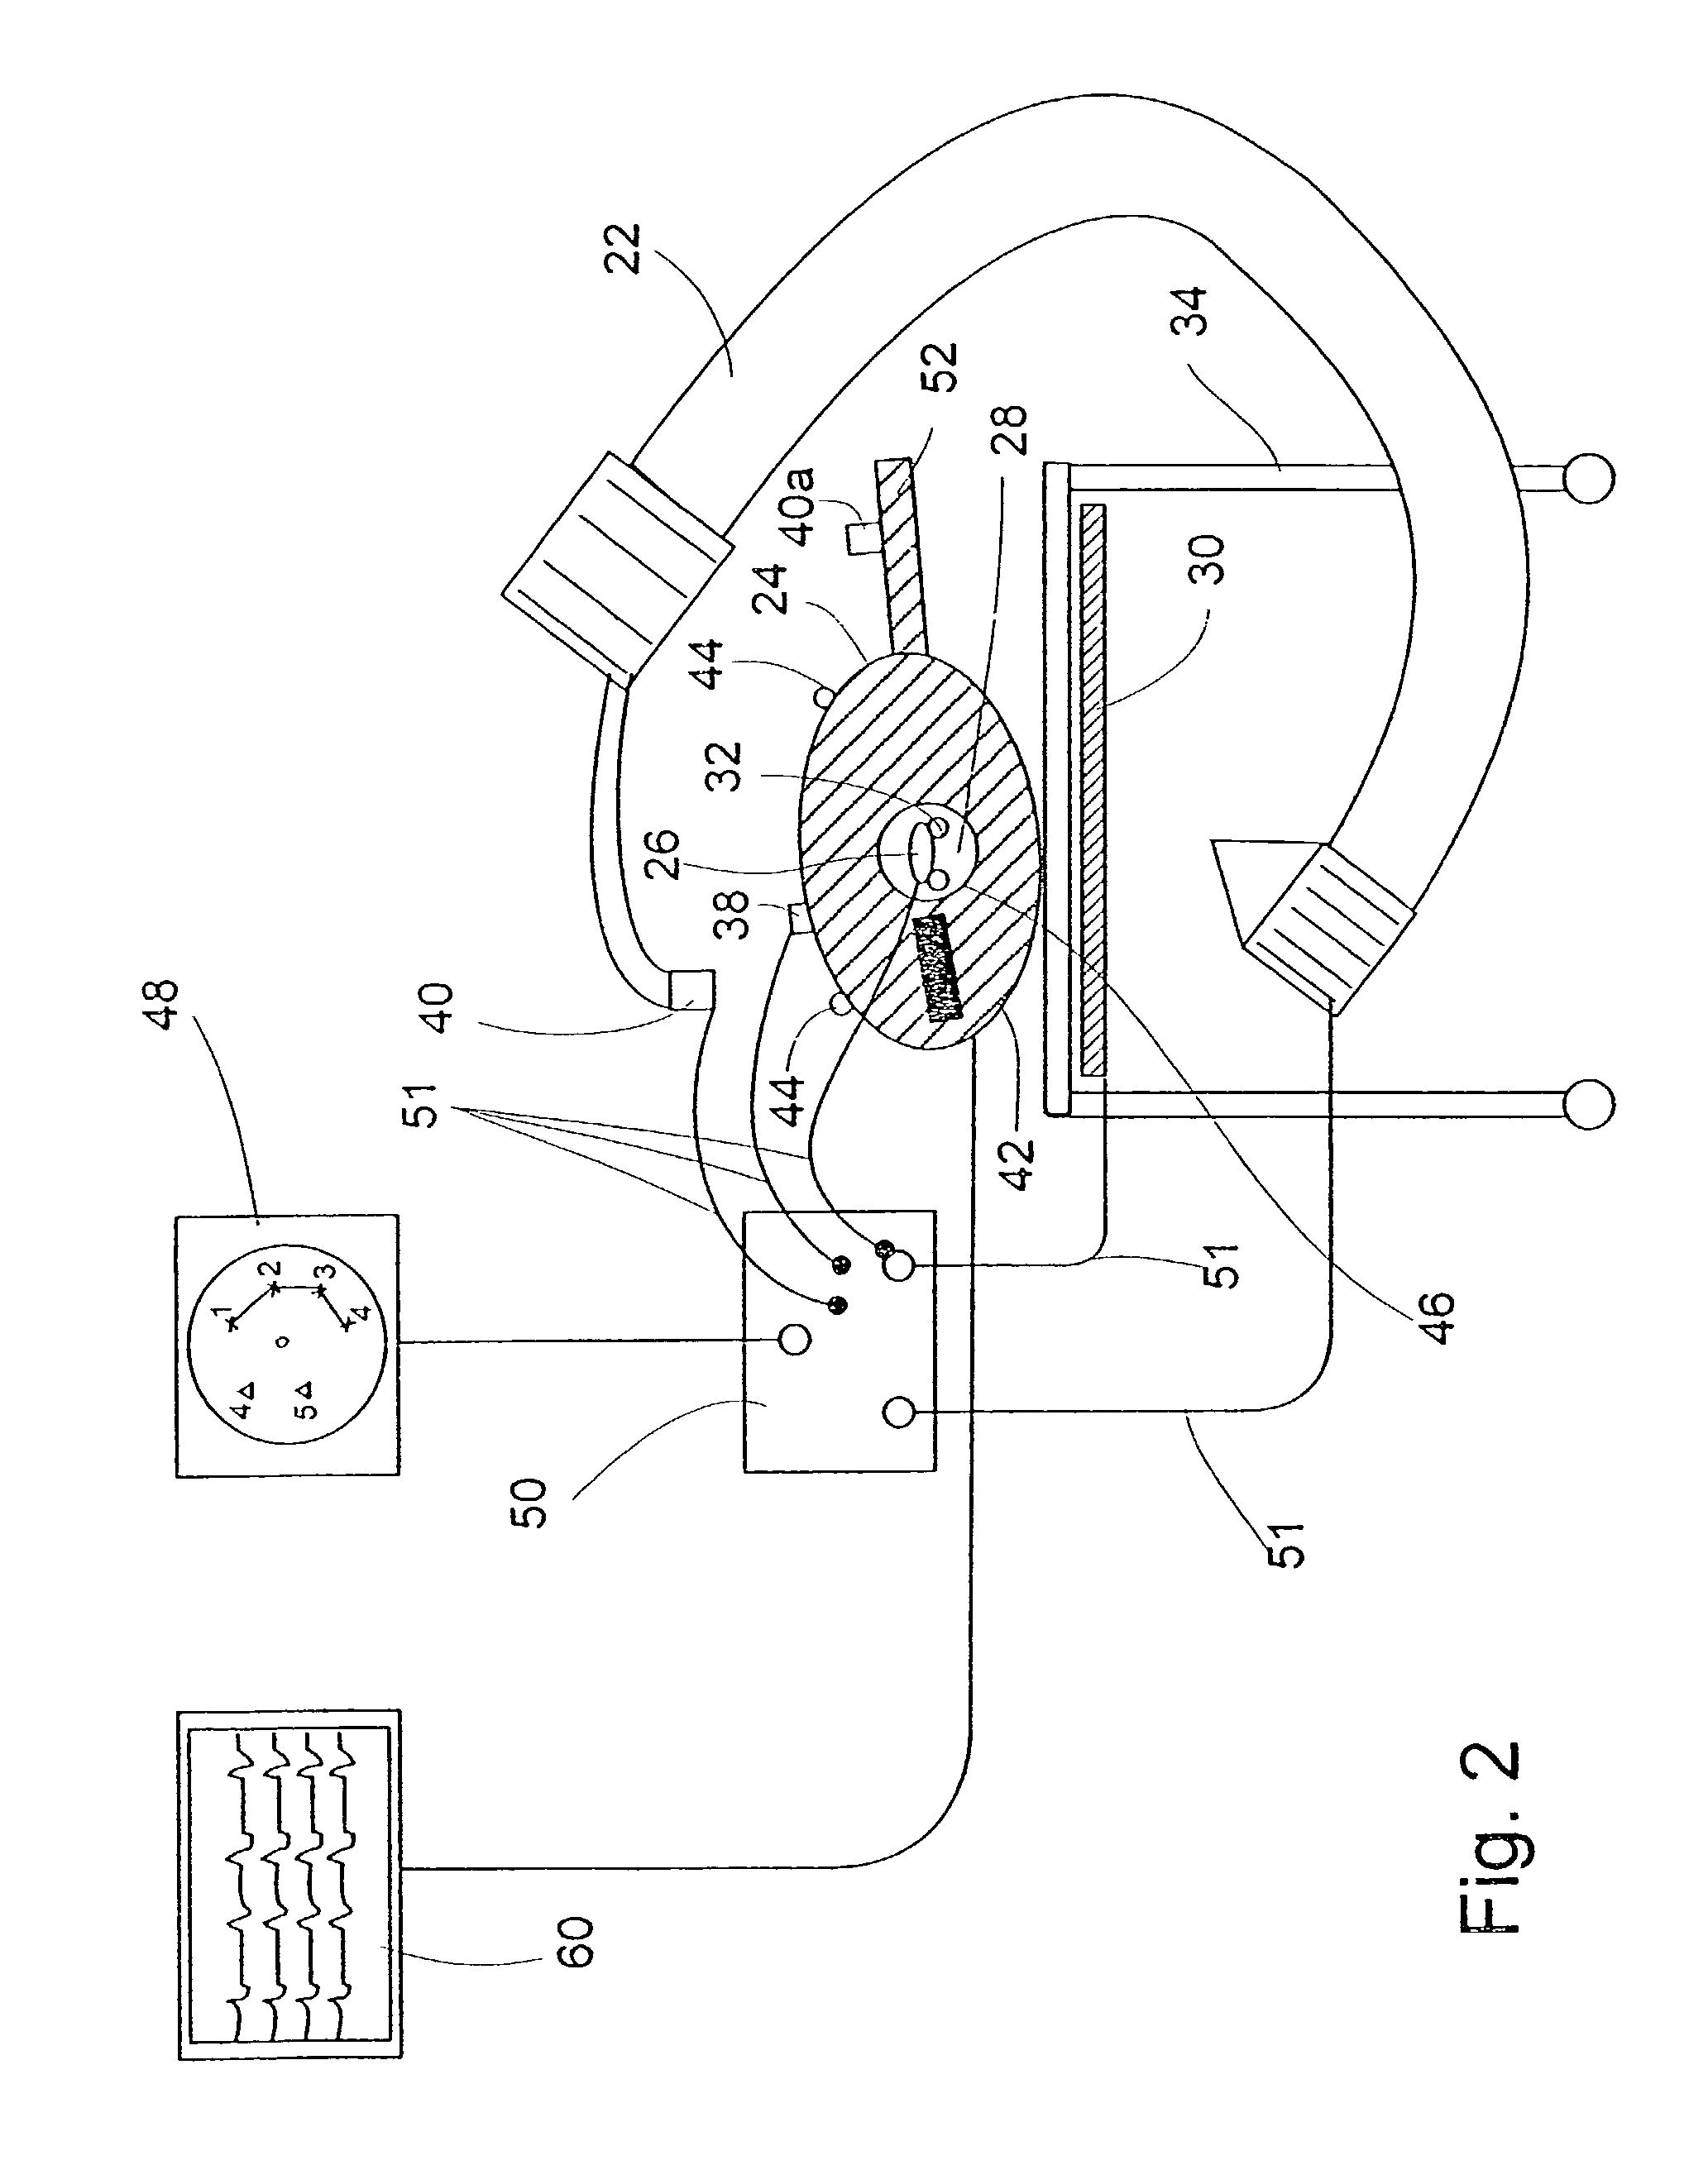 System and method of recording and displaying in context of an image a location of at least one point-of-interest in a body during an intra-body medical procedure